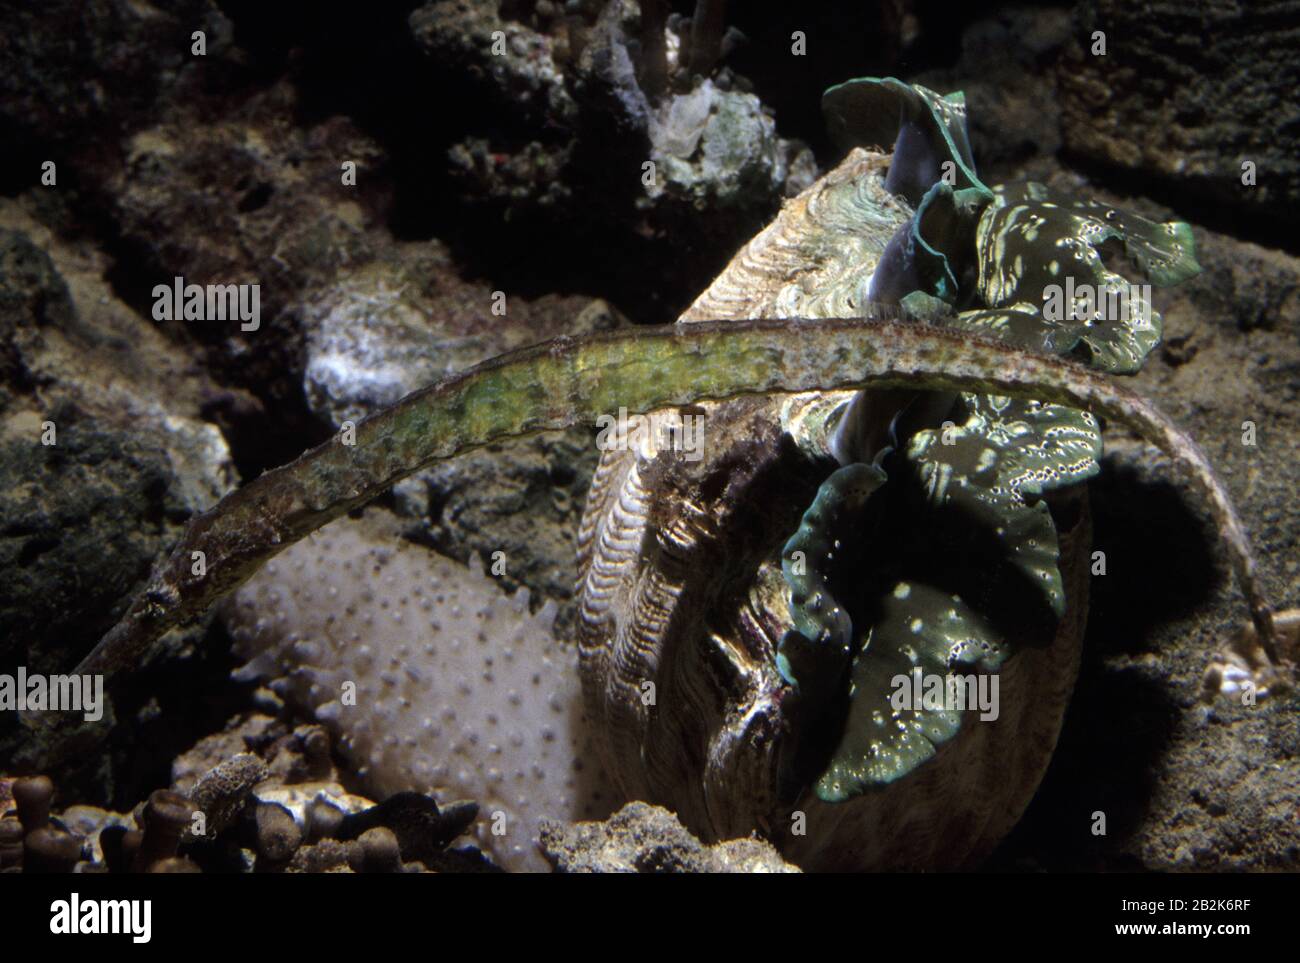 Alligator or double-ended pipefish, Syngnathoides biaculeatus Stock Photo